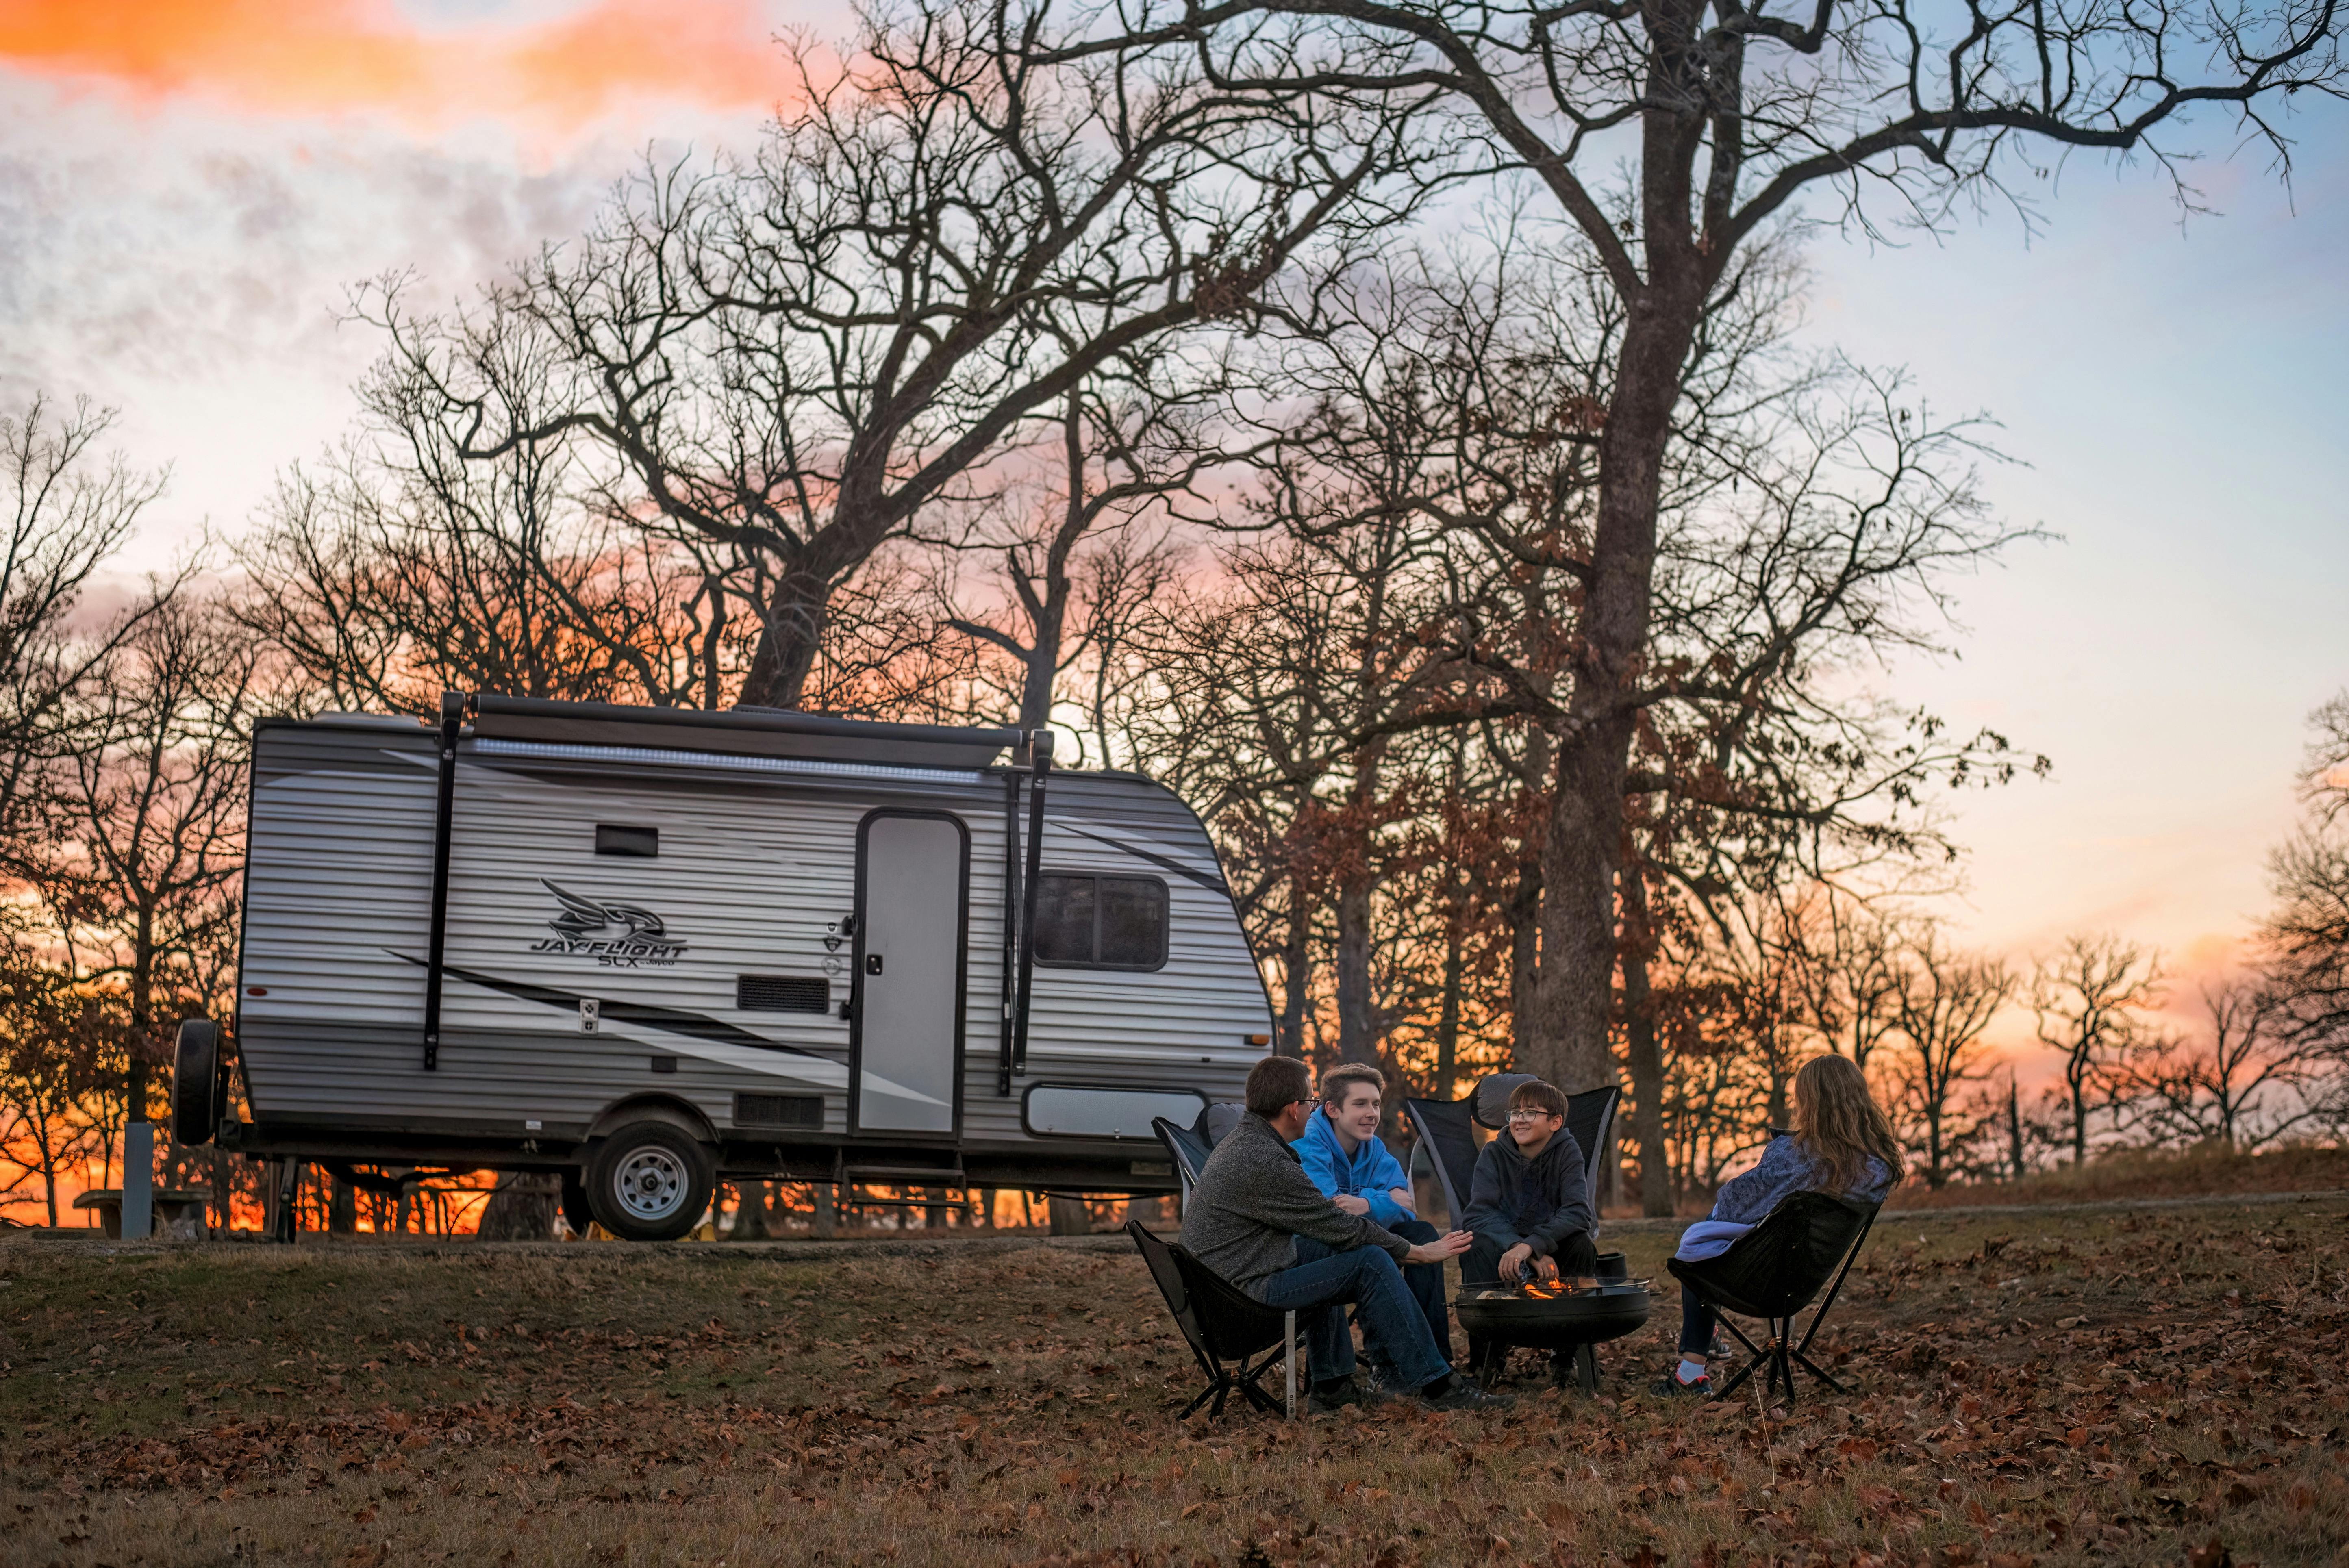 The Jason and Alison Takacs family gather around a campfire next to their Jayco Jay Flight travel trailer during sunset.